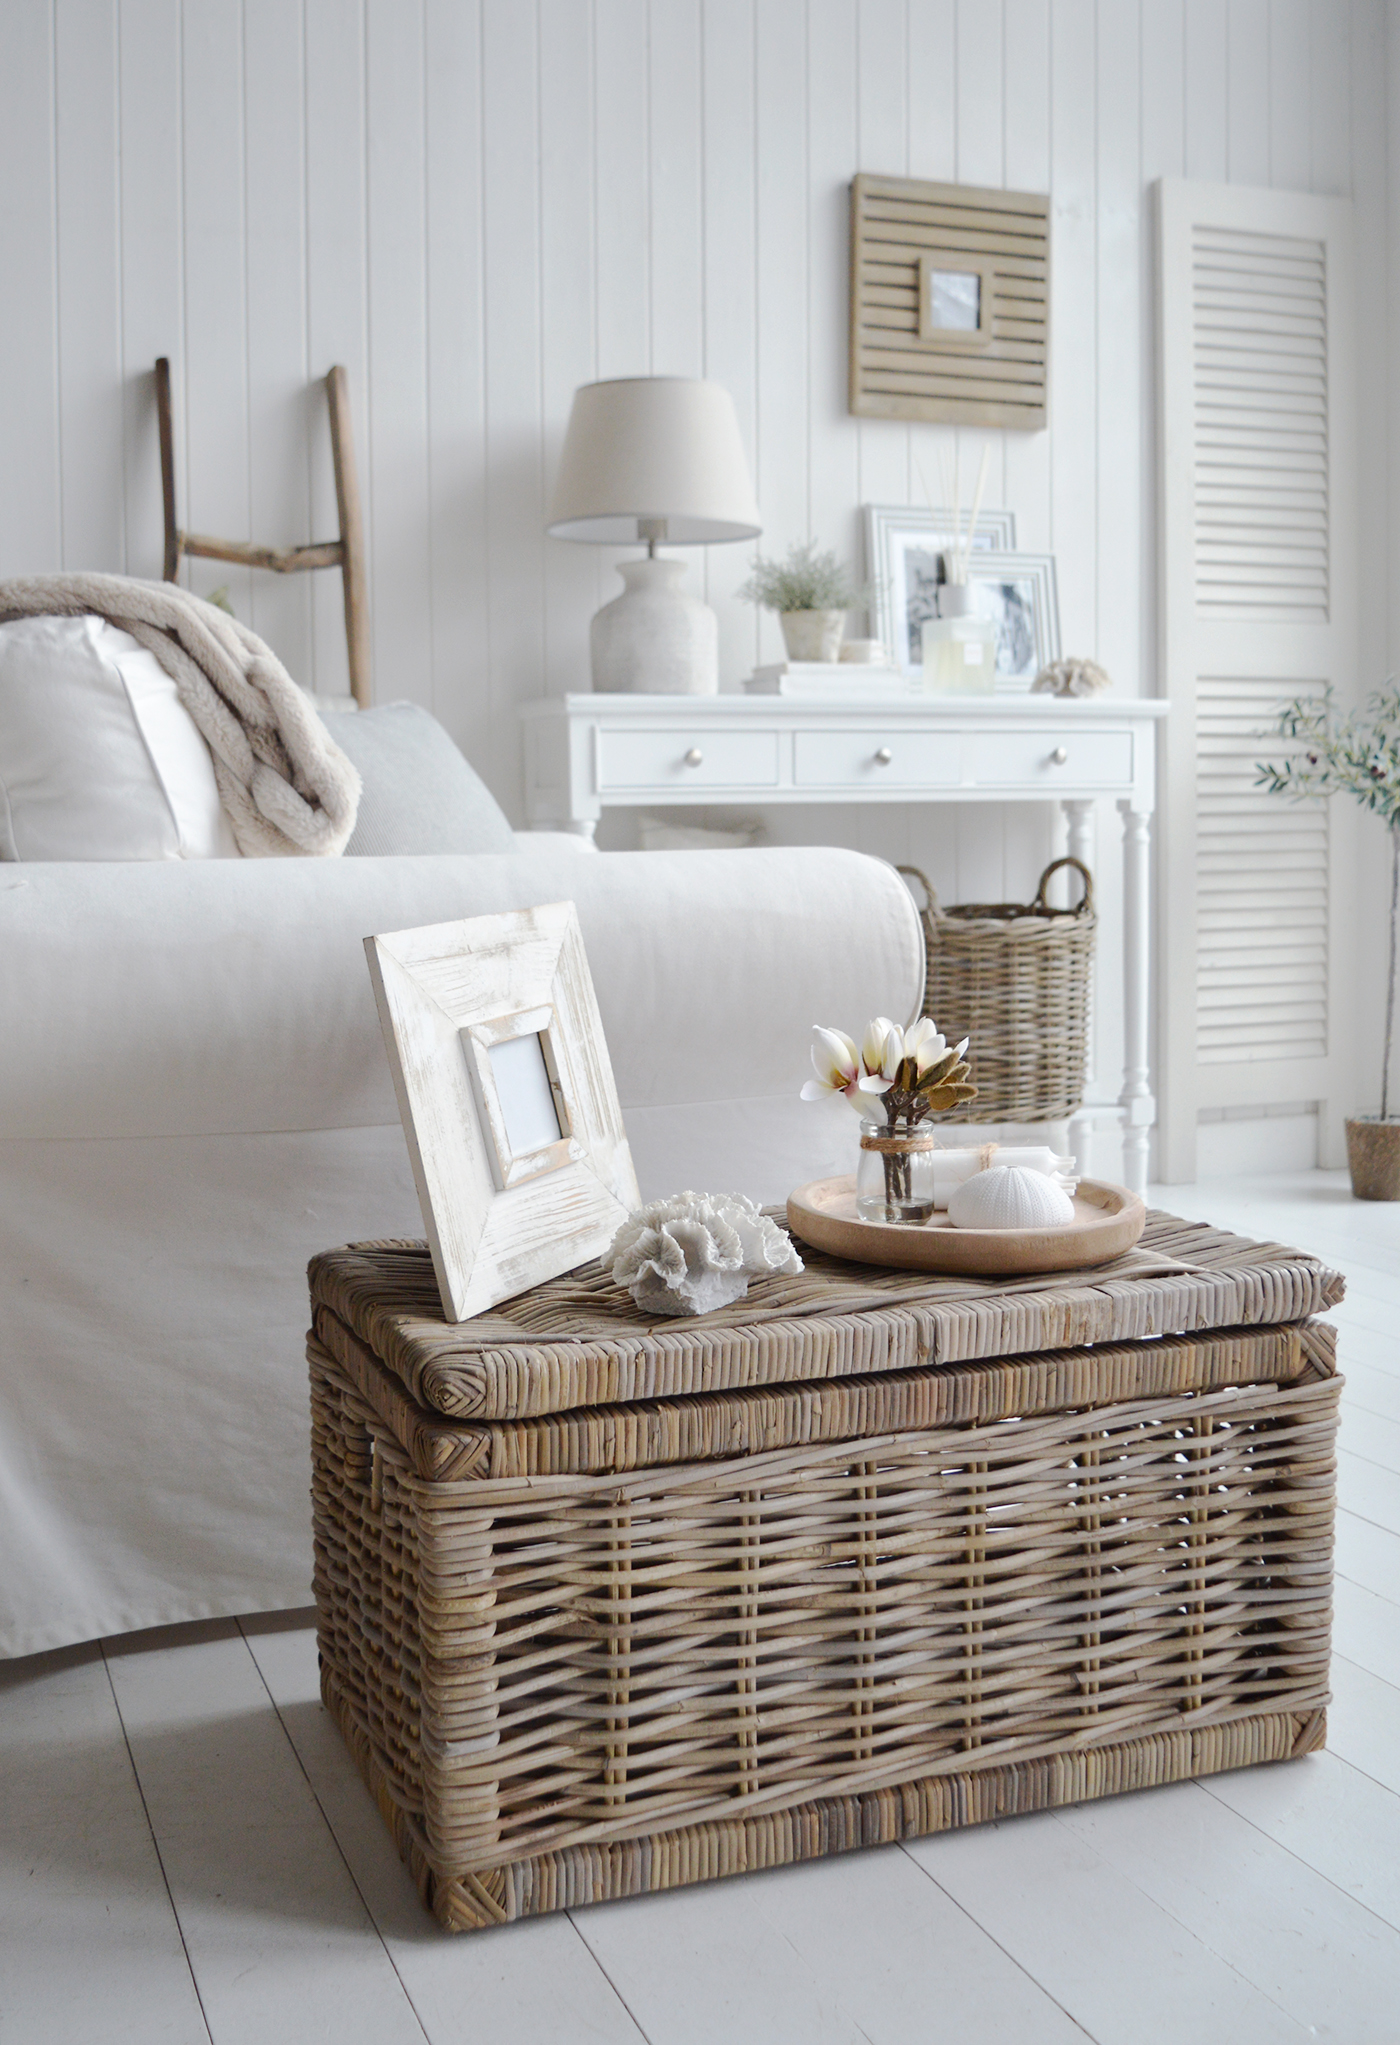 A modern farmhouse or castal living room with white furniture along with the Seaside basket table in gryed willow